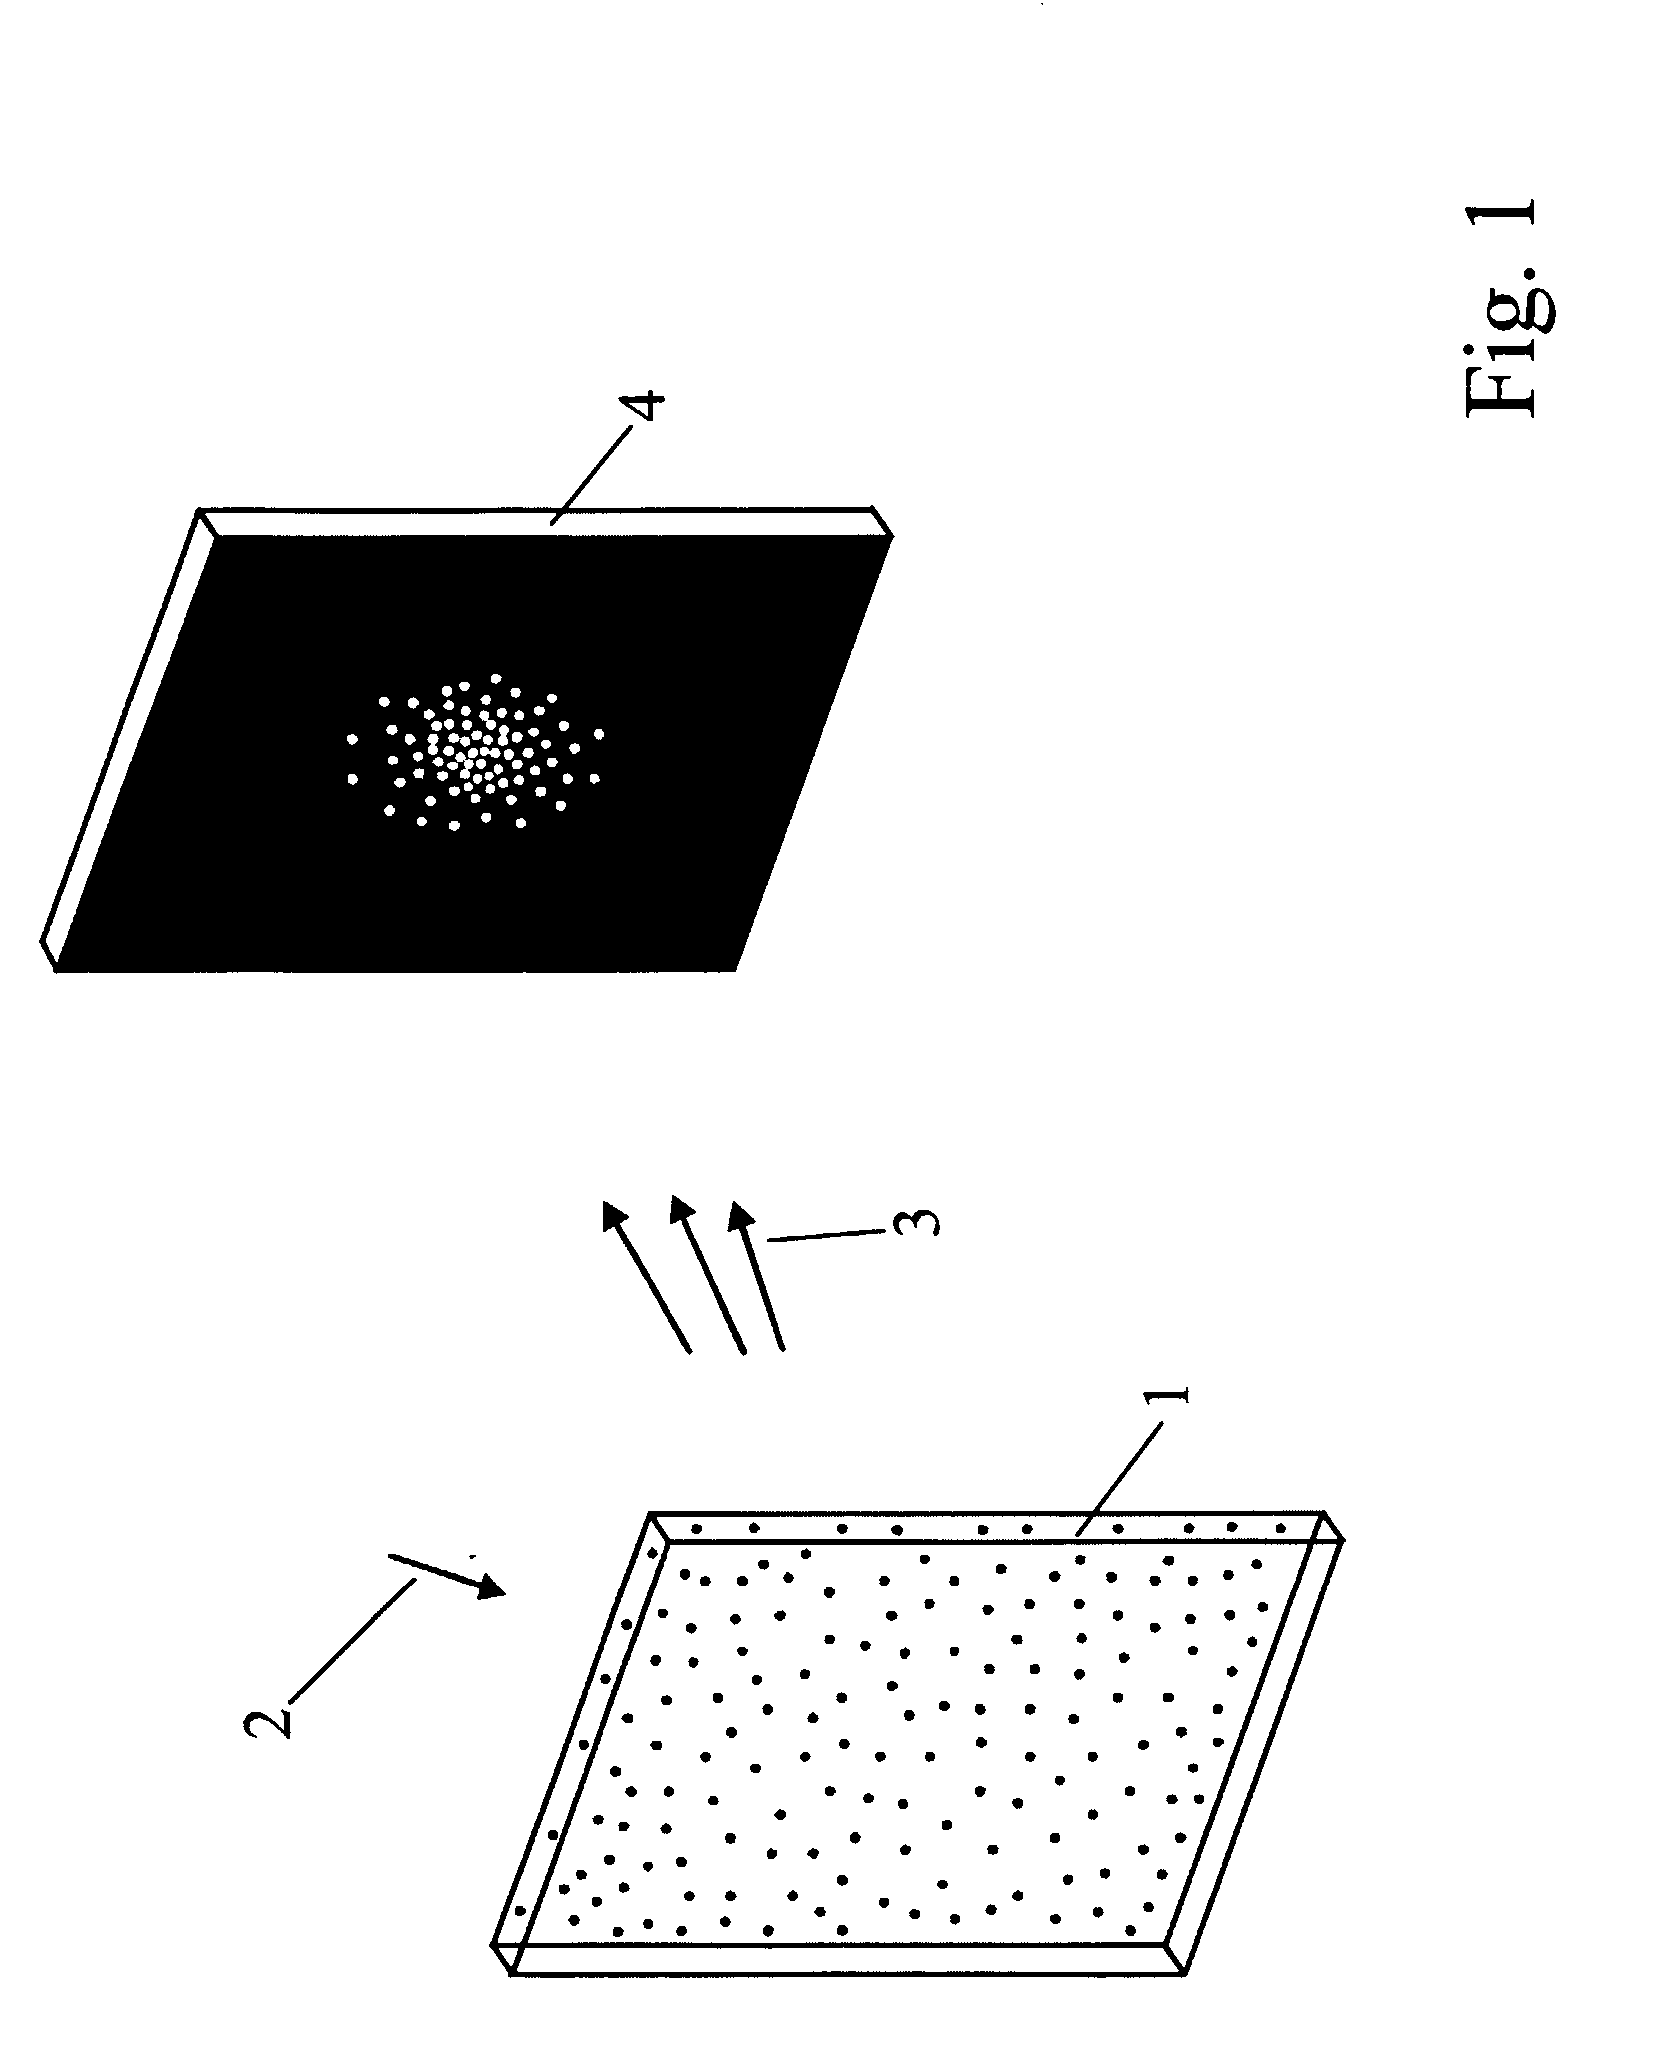 Anisotropic optical device and method for making same